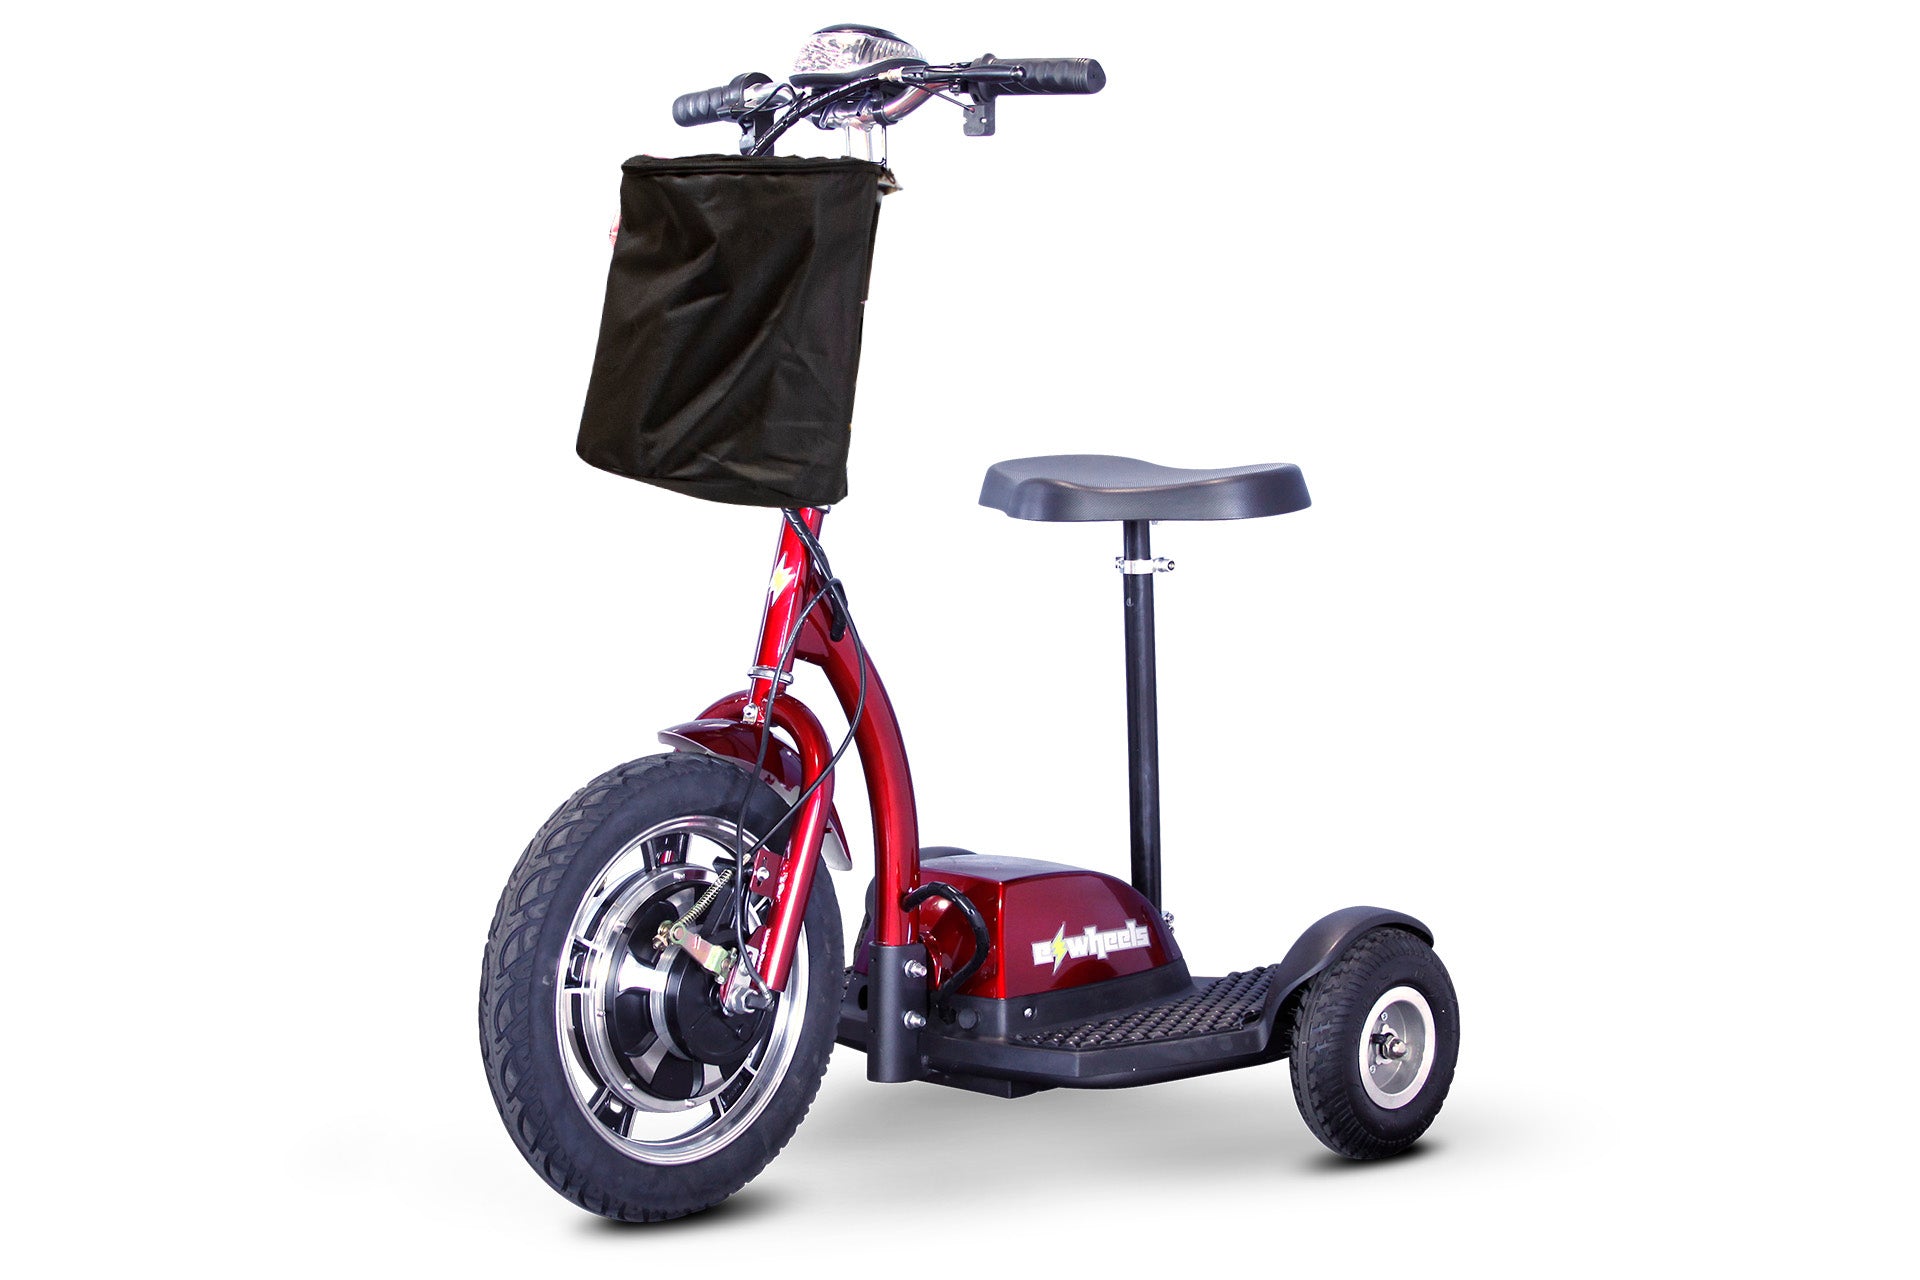 RED 3WHEEL SCOOTER EWheels EW-18 Stand-N-Ride 3 Wheel Mobility Recreational Scooter - PureUps